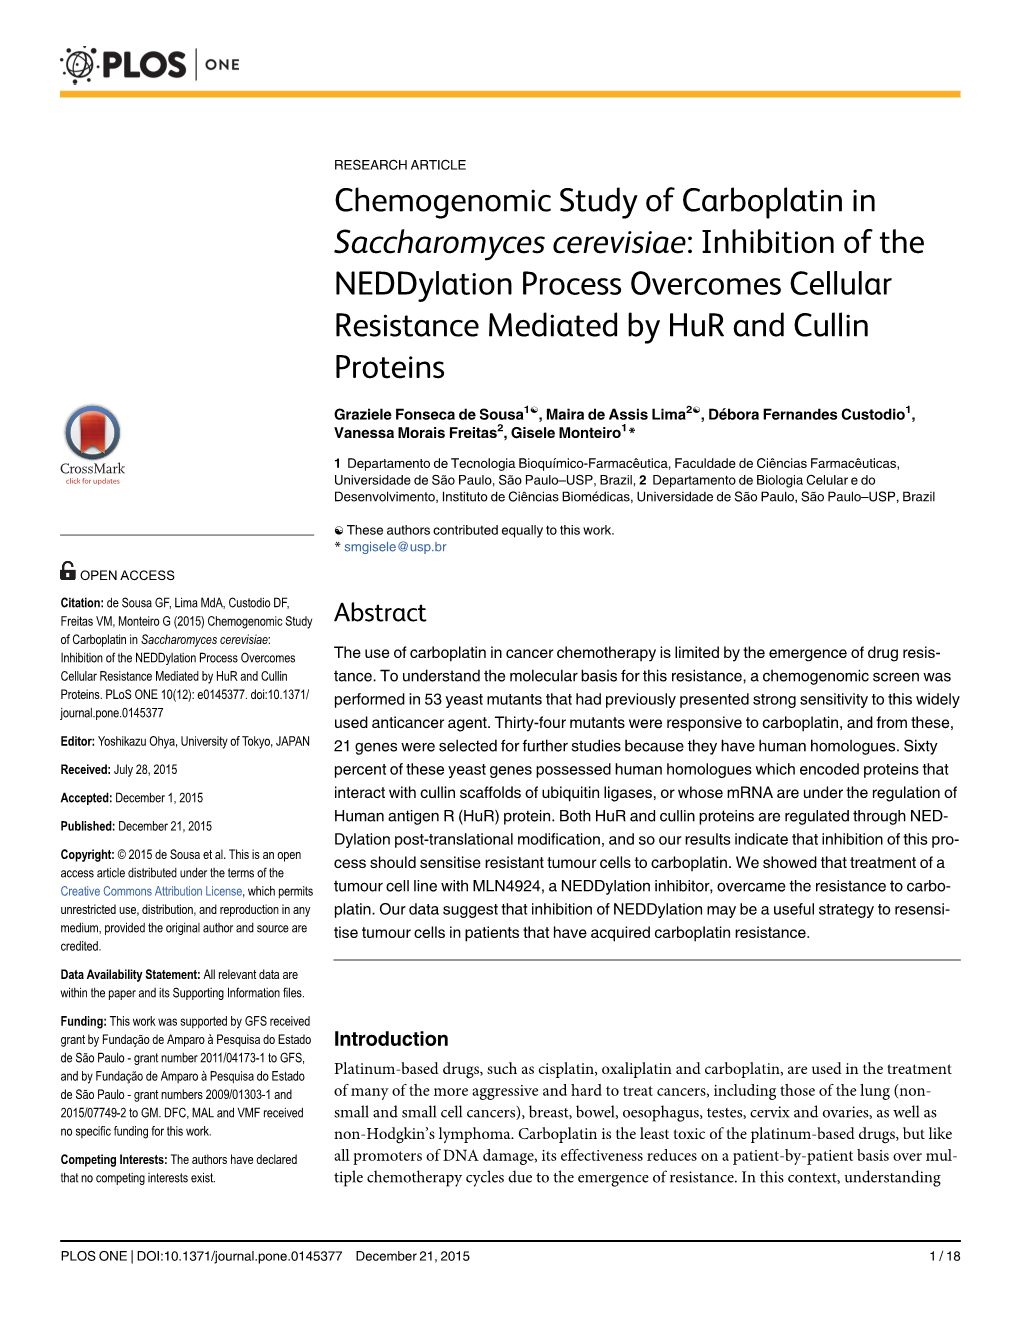 Chemogenomic Study of Carboplatin in Saccharomyces Cerevisiae: Inhibition of the Neddylation Process Overcomes Cellular Resistance Mediated by Hur and Cullin Proteins